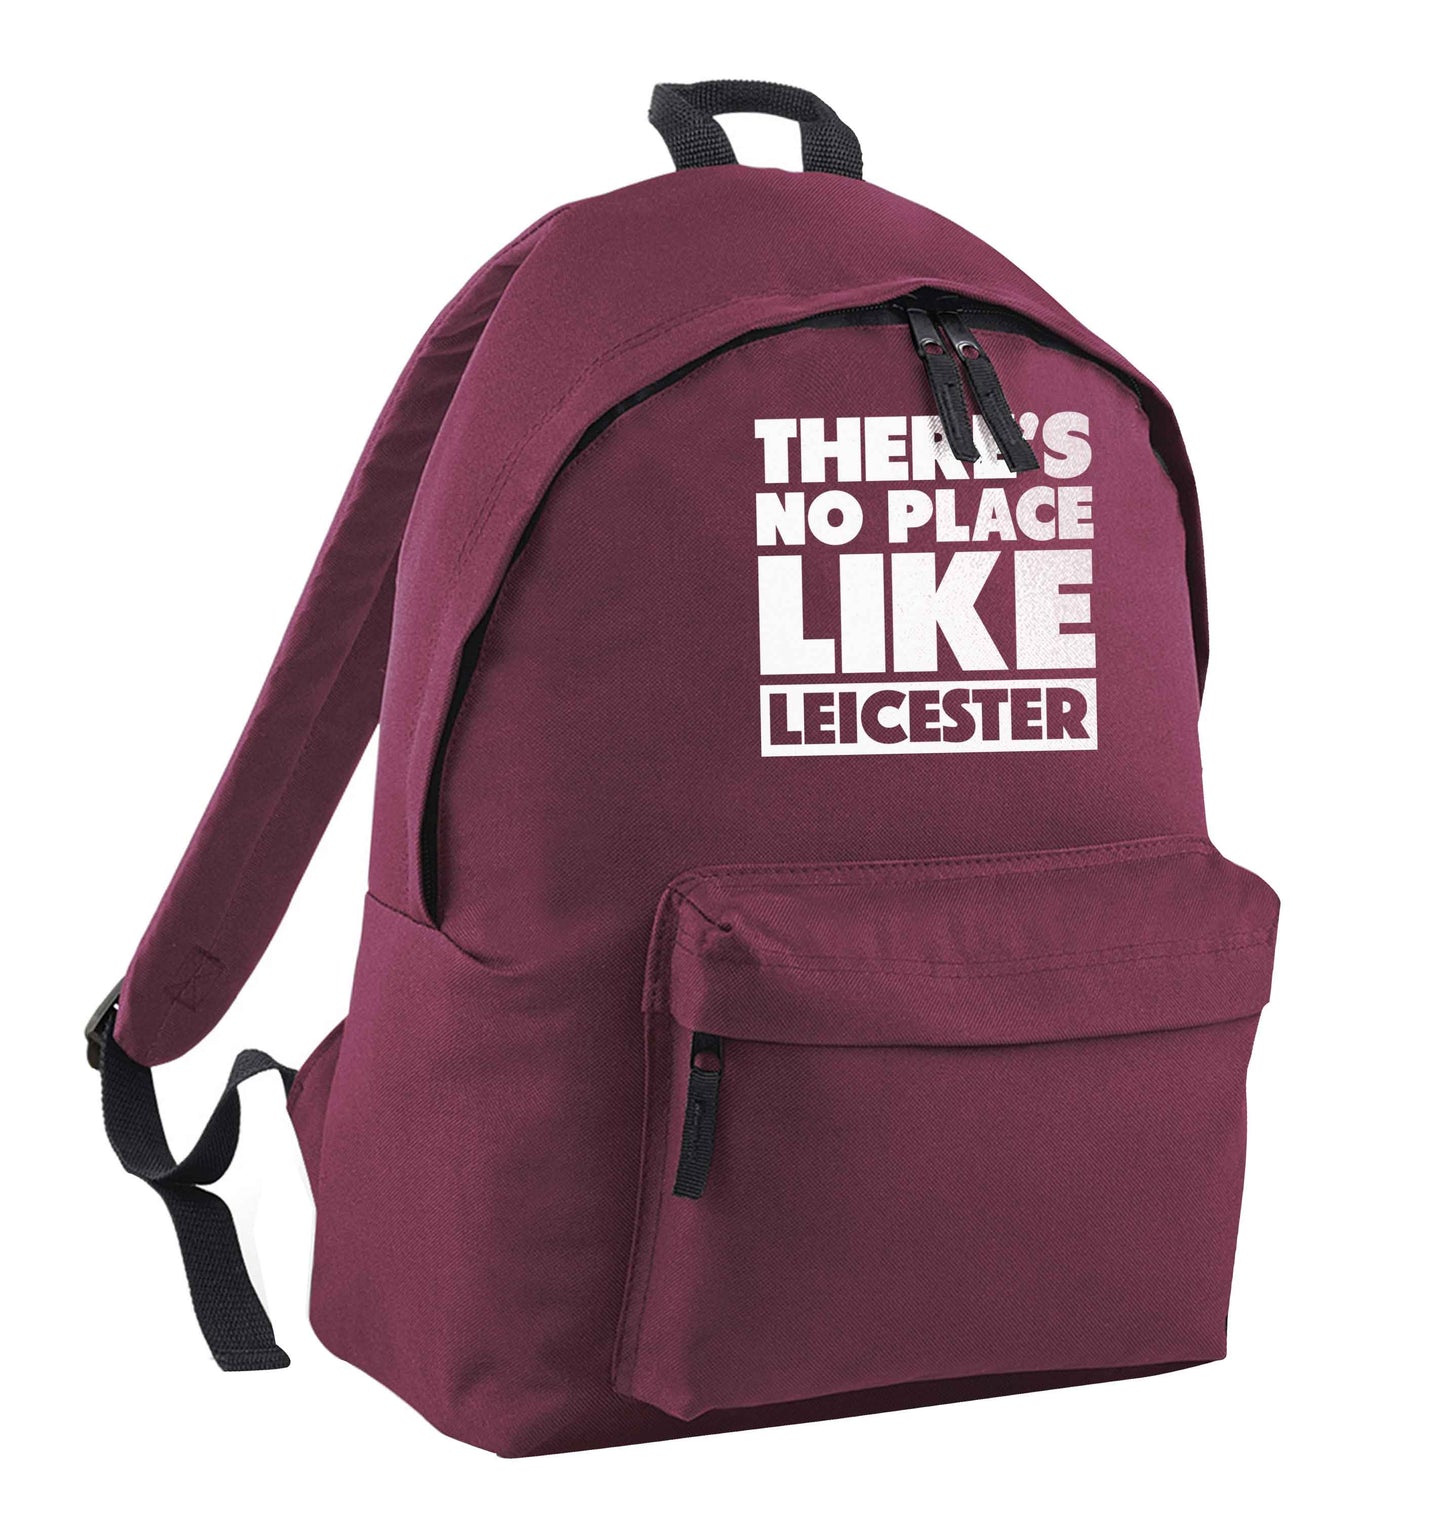 There's no place like Leicester maroon adults backpack